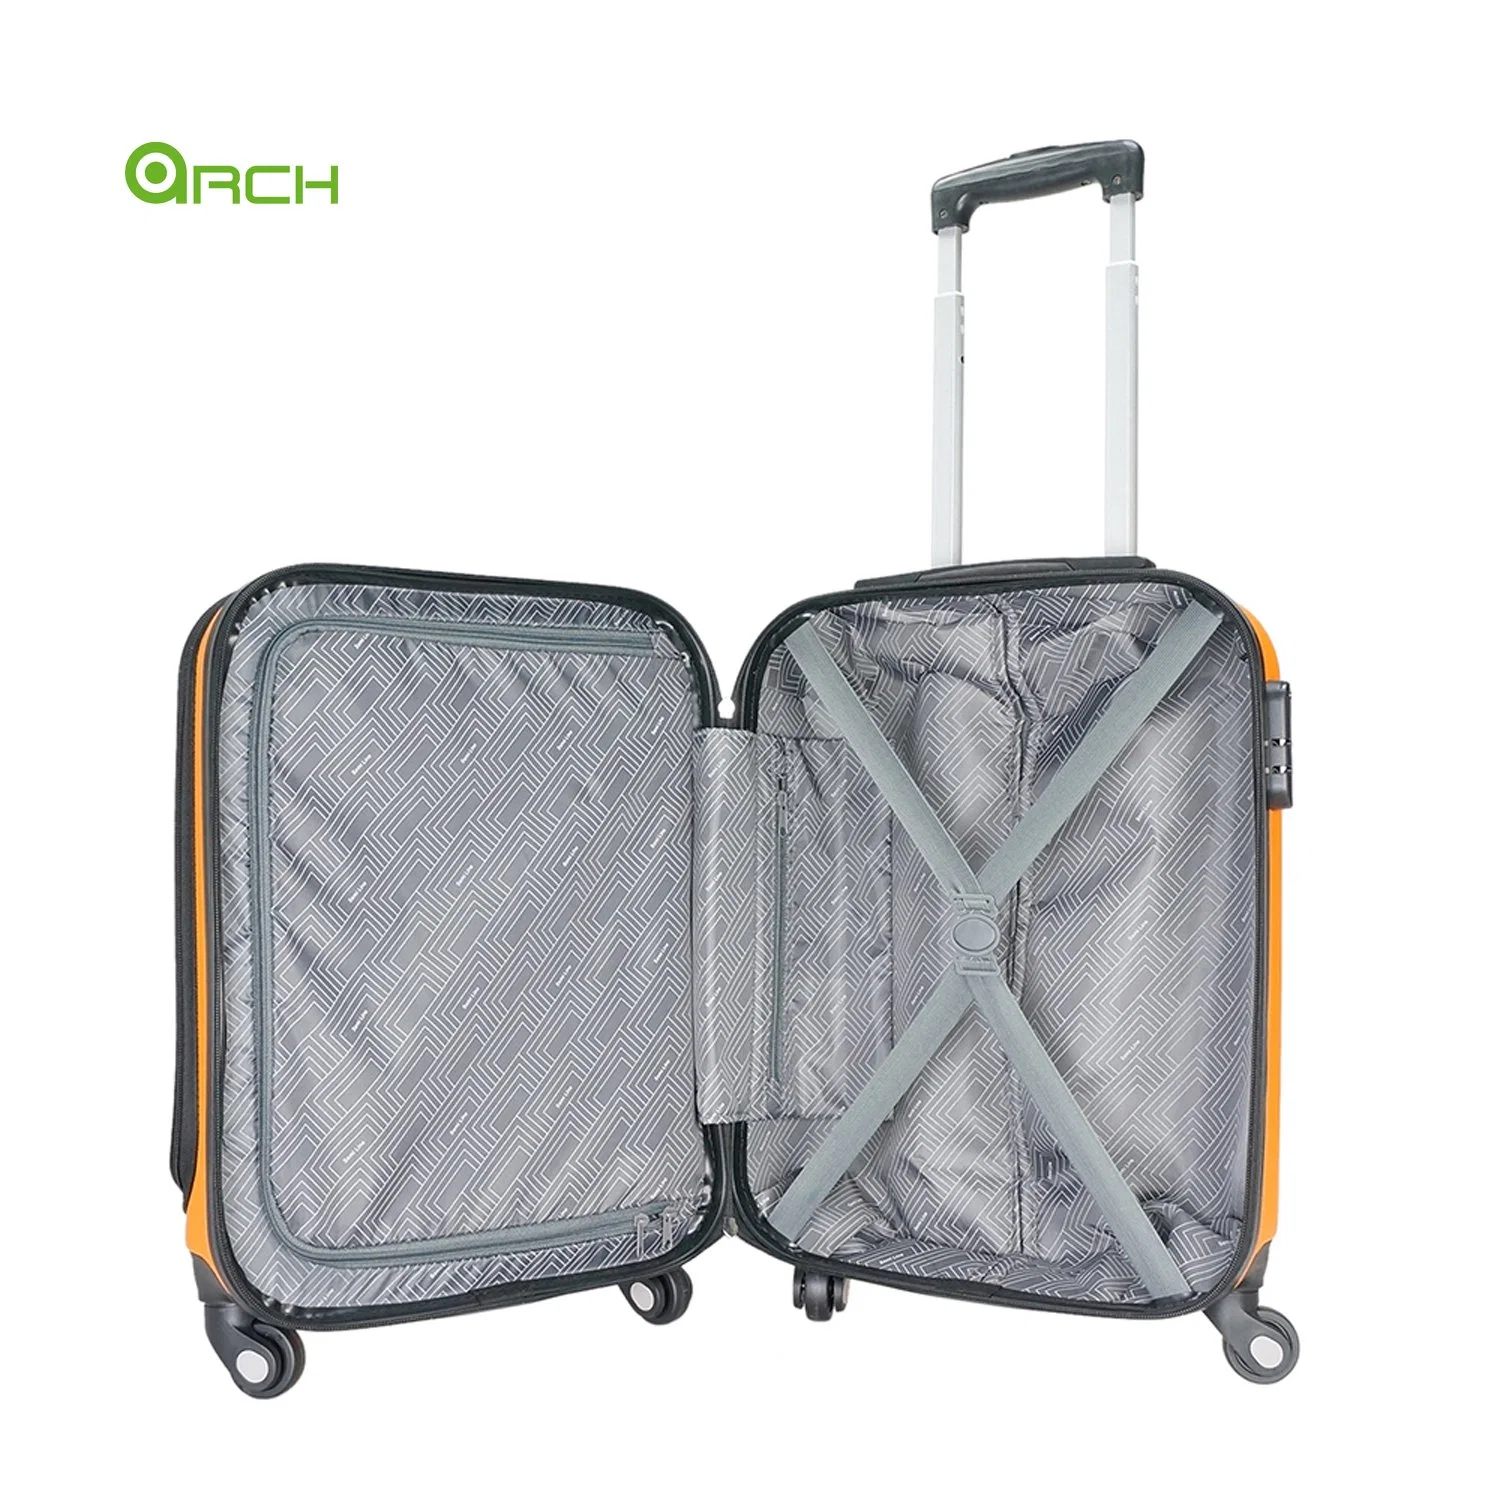 ABS Light Case with Front Opening Compartment Spinner Trolley Travel Case